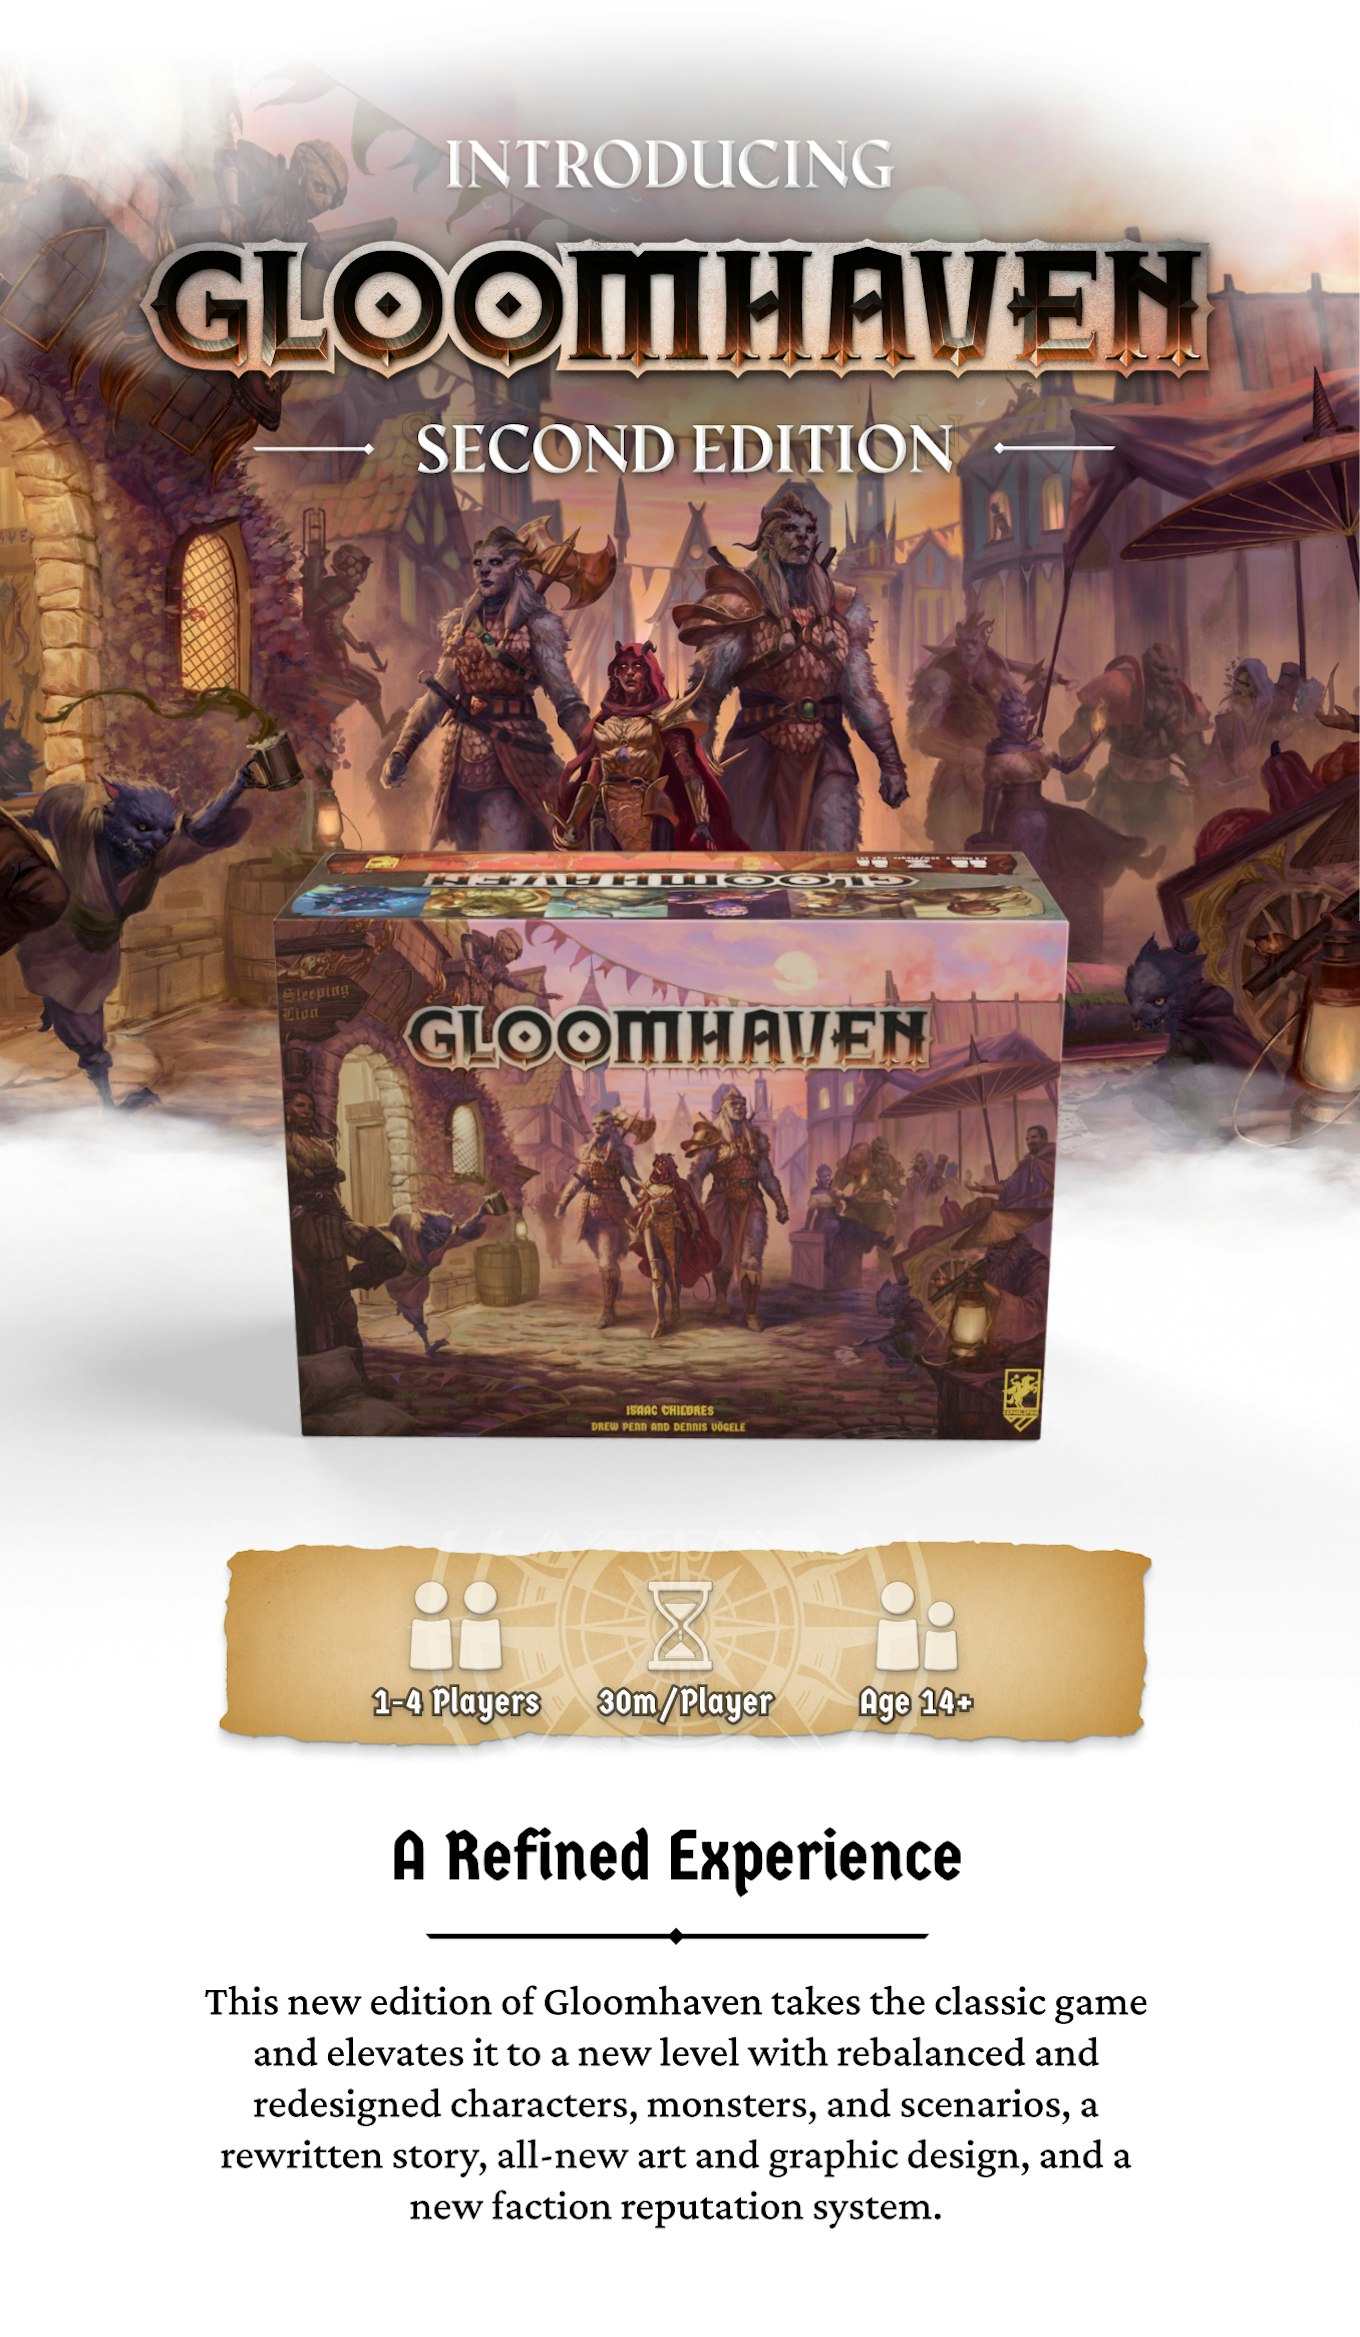 500 Miniatures Head To Backerkit For Gloomhaven! – OnTableTop